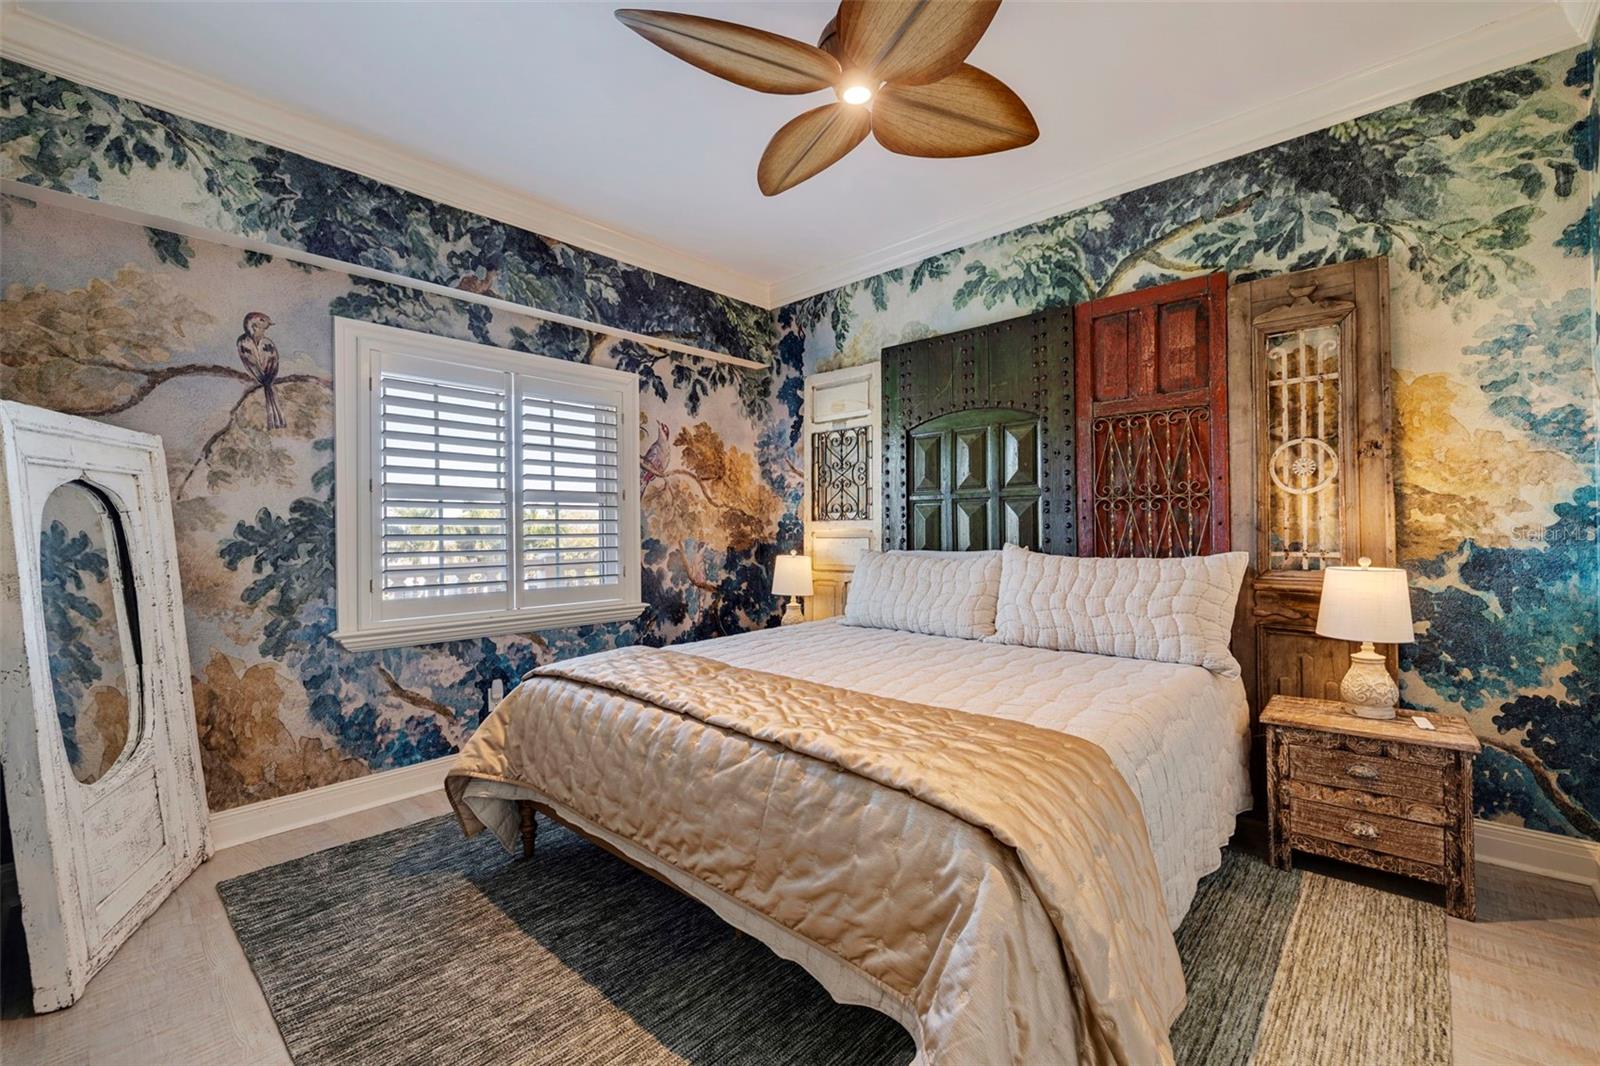 Who wouldn't love to stay in this guest room!